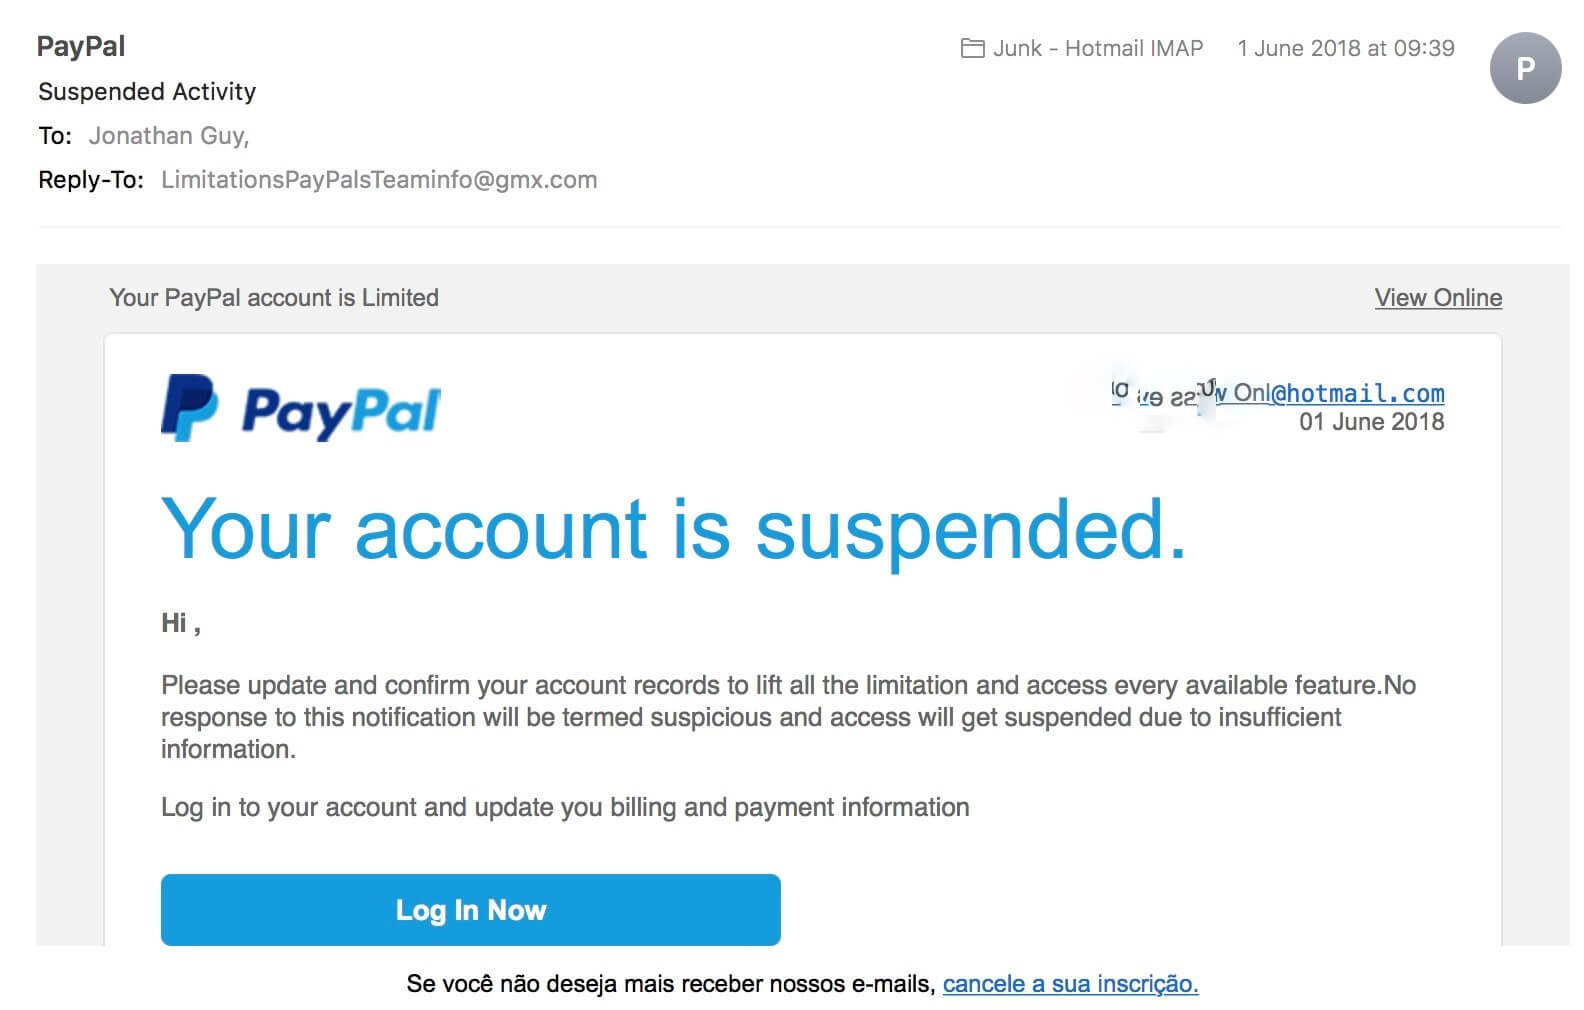 i got scammed on paypal